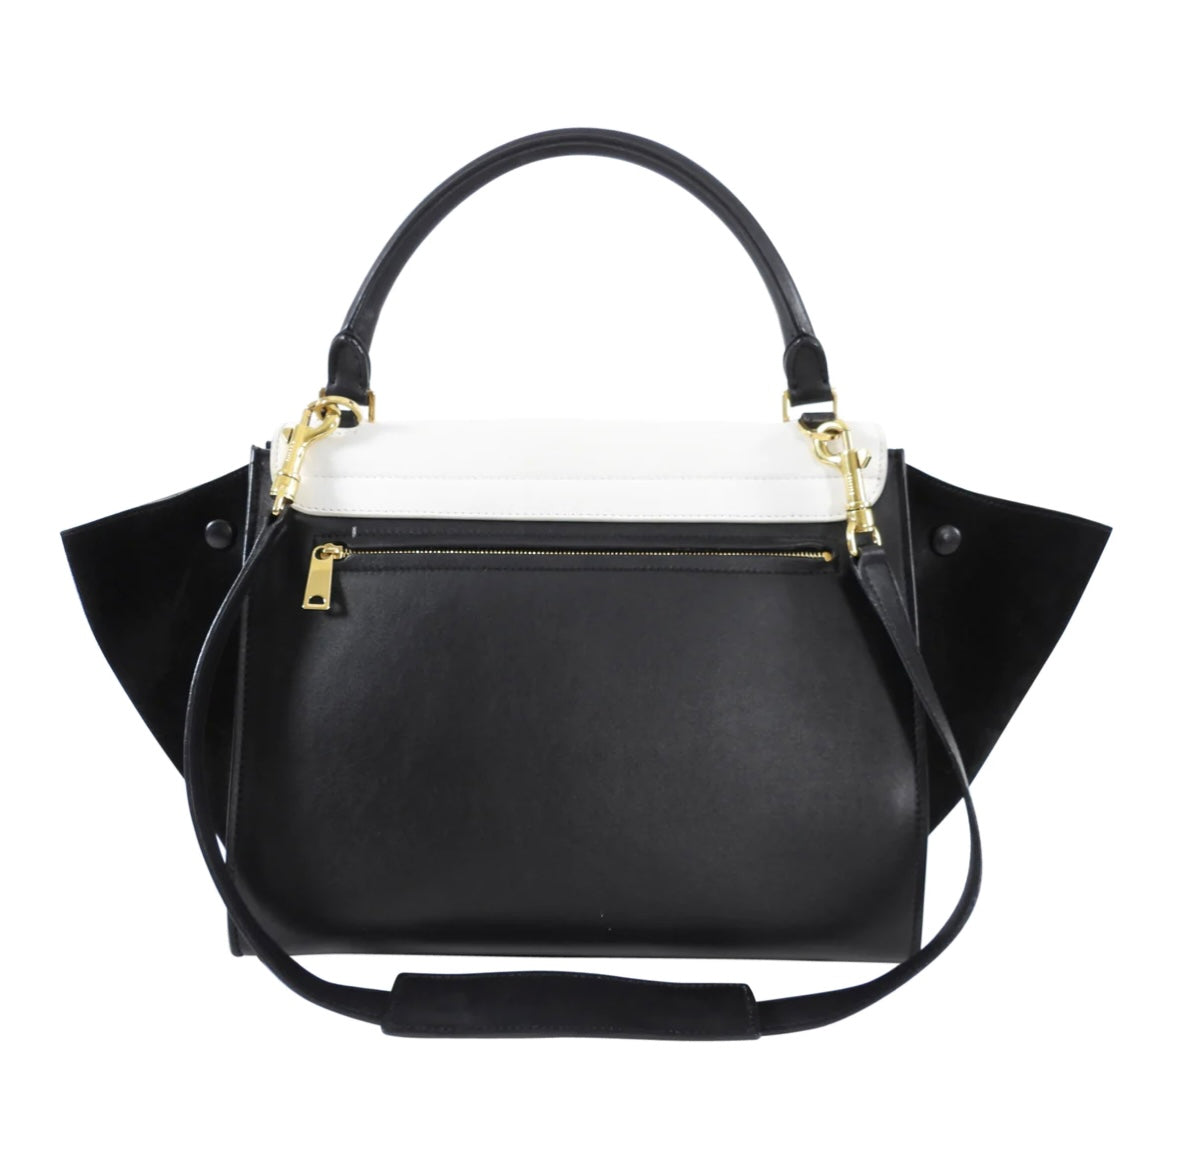 Celine Black and White Medium Trapeze Two Way Bag